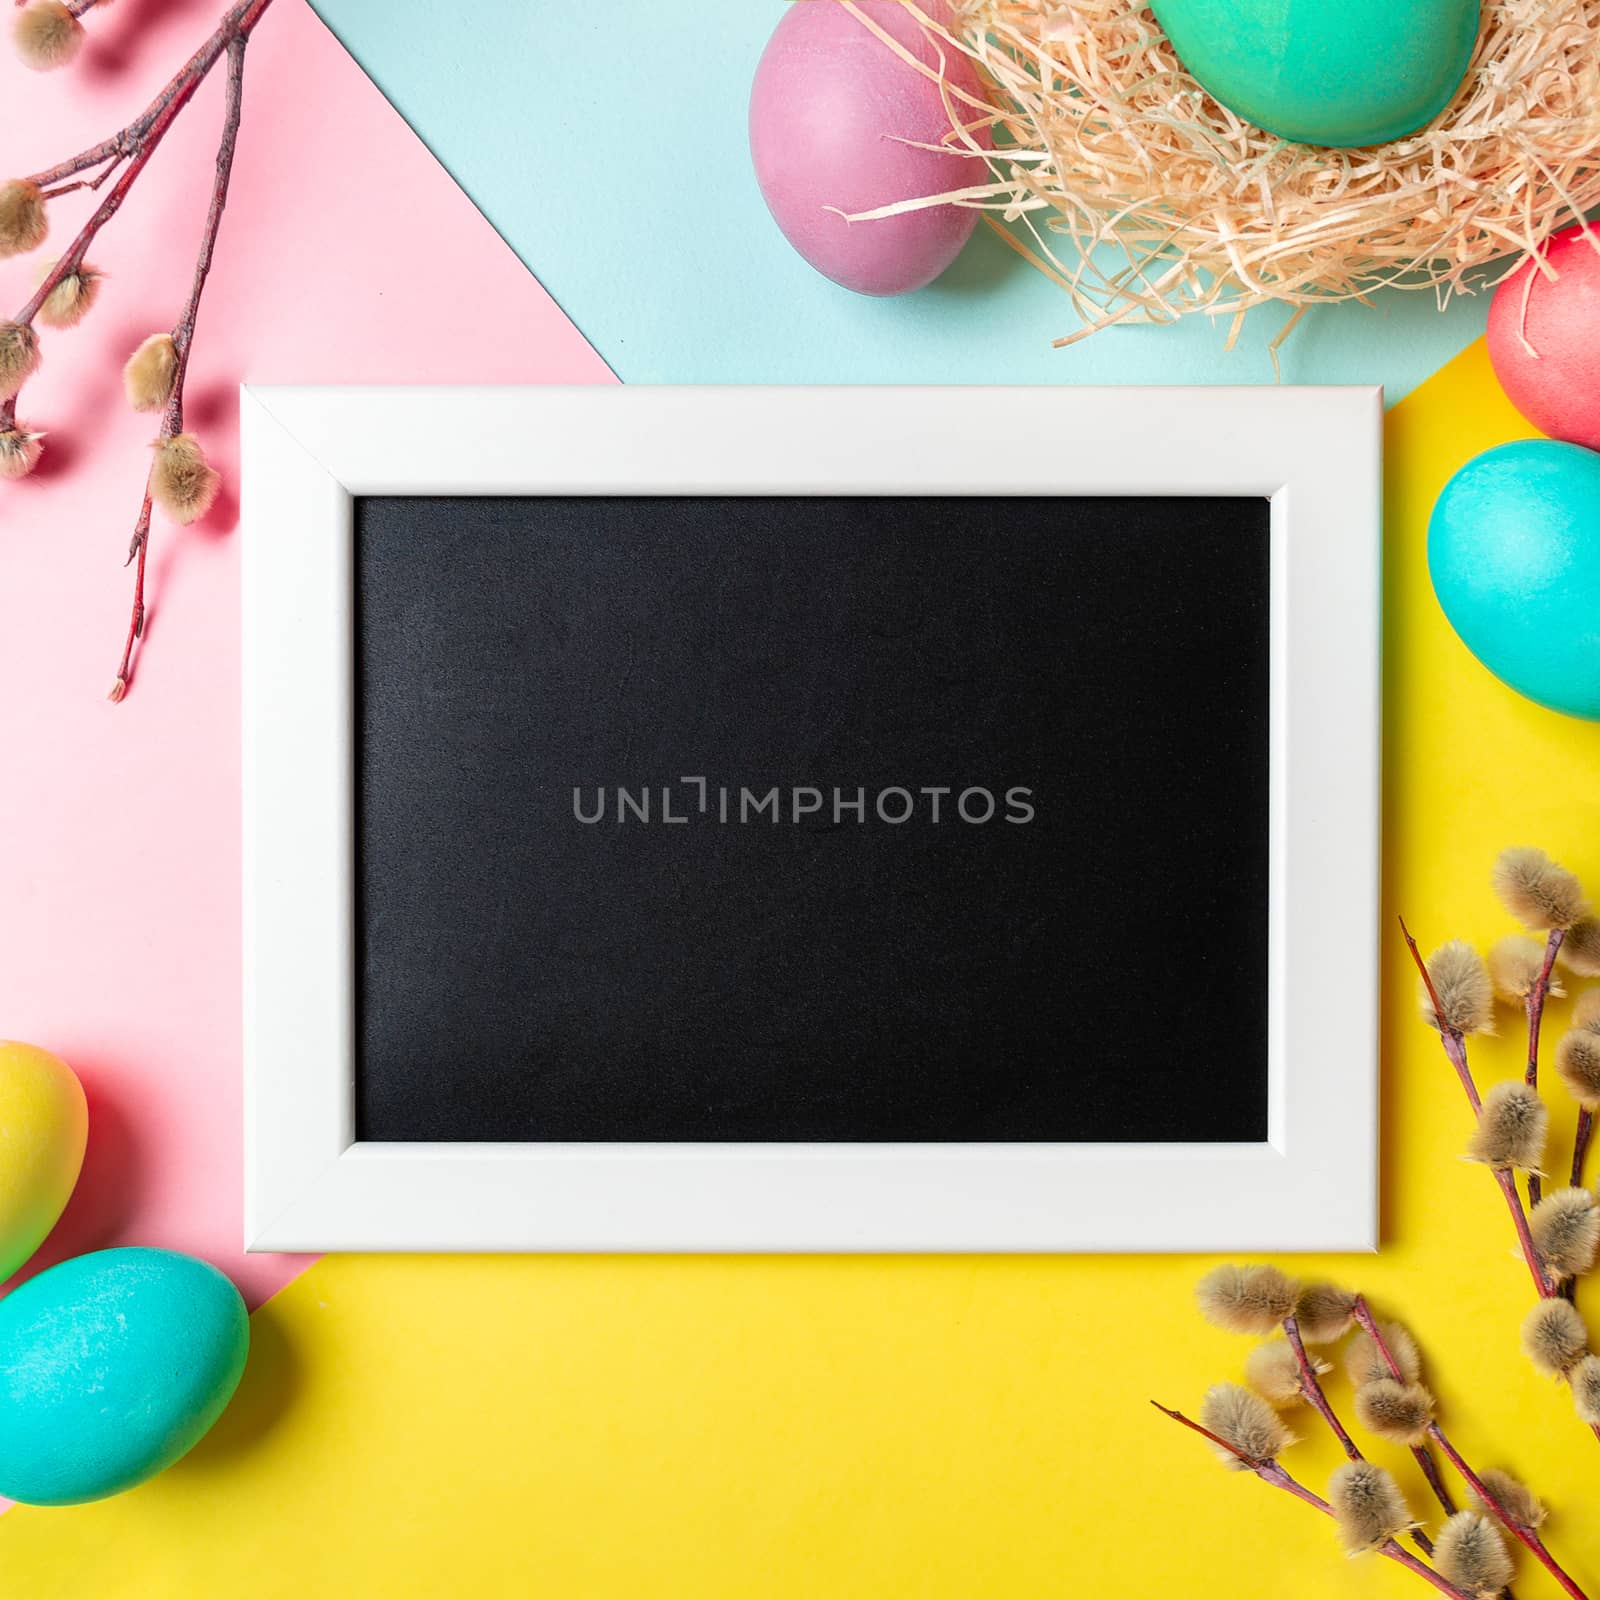 Orthodox Easter concept. Colorful eggs and pussy willow branches on bright colorful background with empty chalkboard. Copy space for greetings, text or design. Top down view or flat lay. Square crop